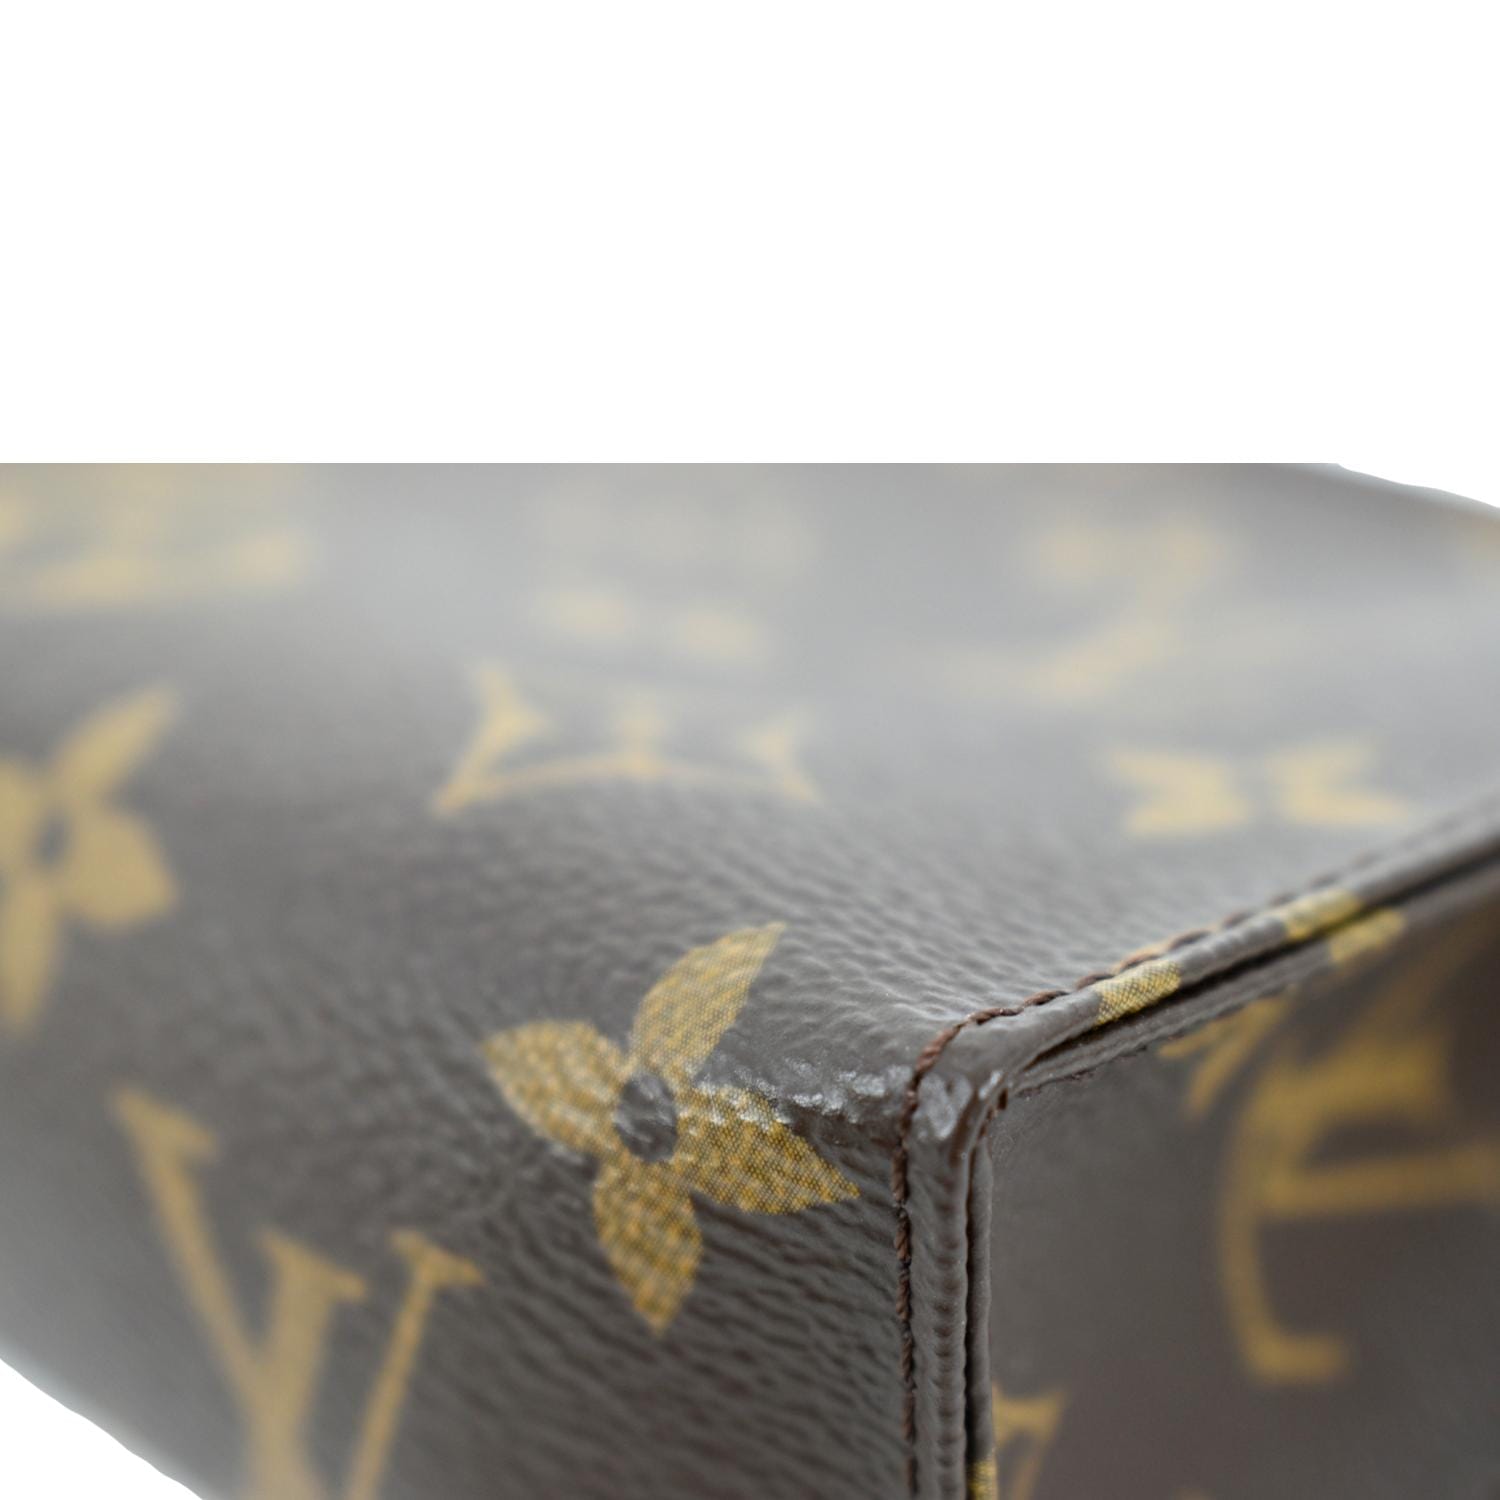 LV Giant Monogram Cosmetic Pouch